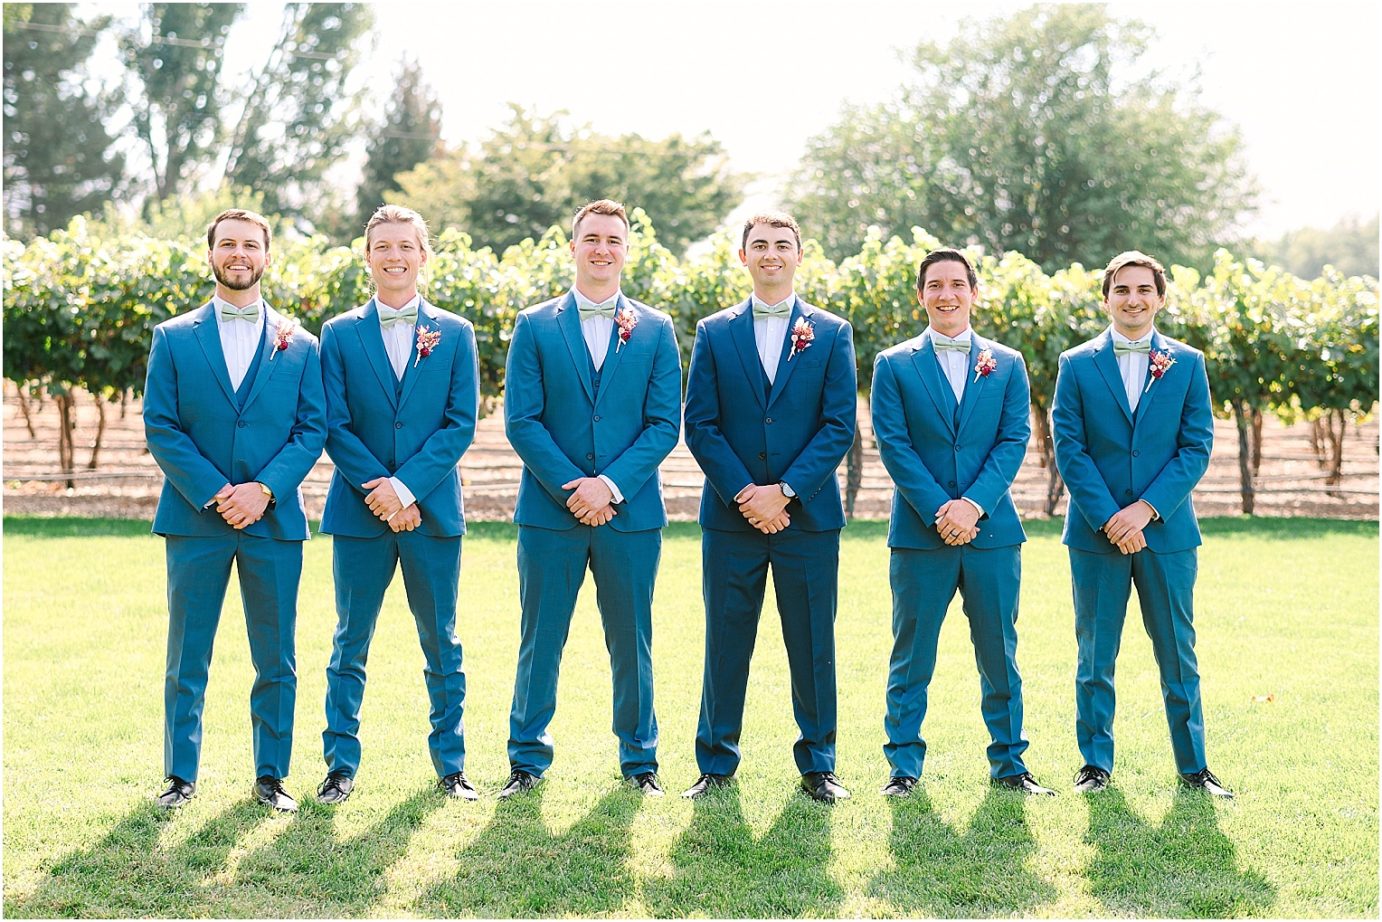 Wedding at Sugar Pine Barn - groom and groomsmen wearing navy tux with fall colored boutonniere